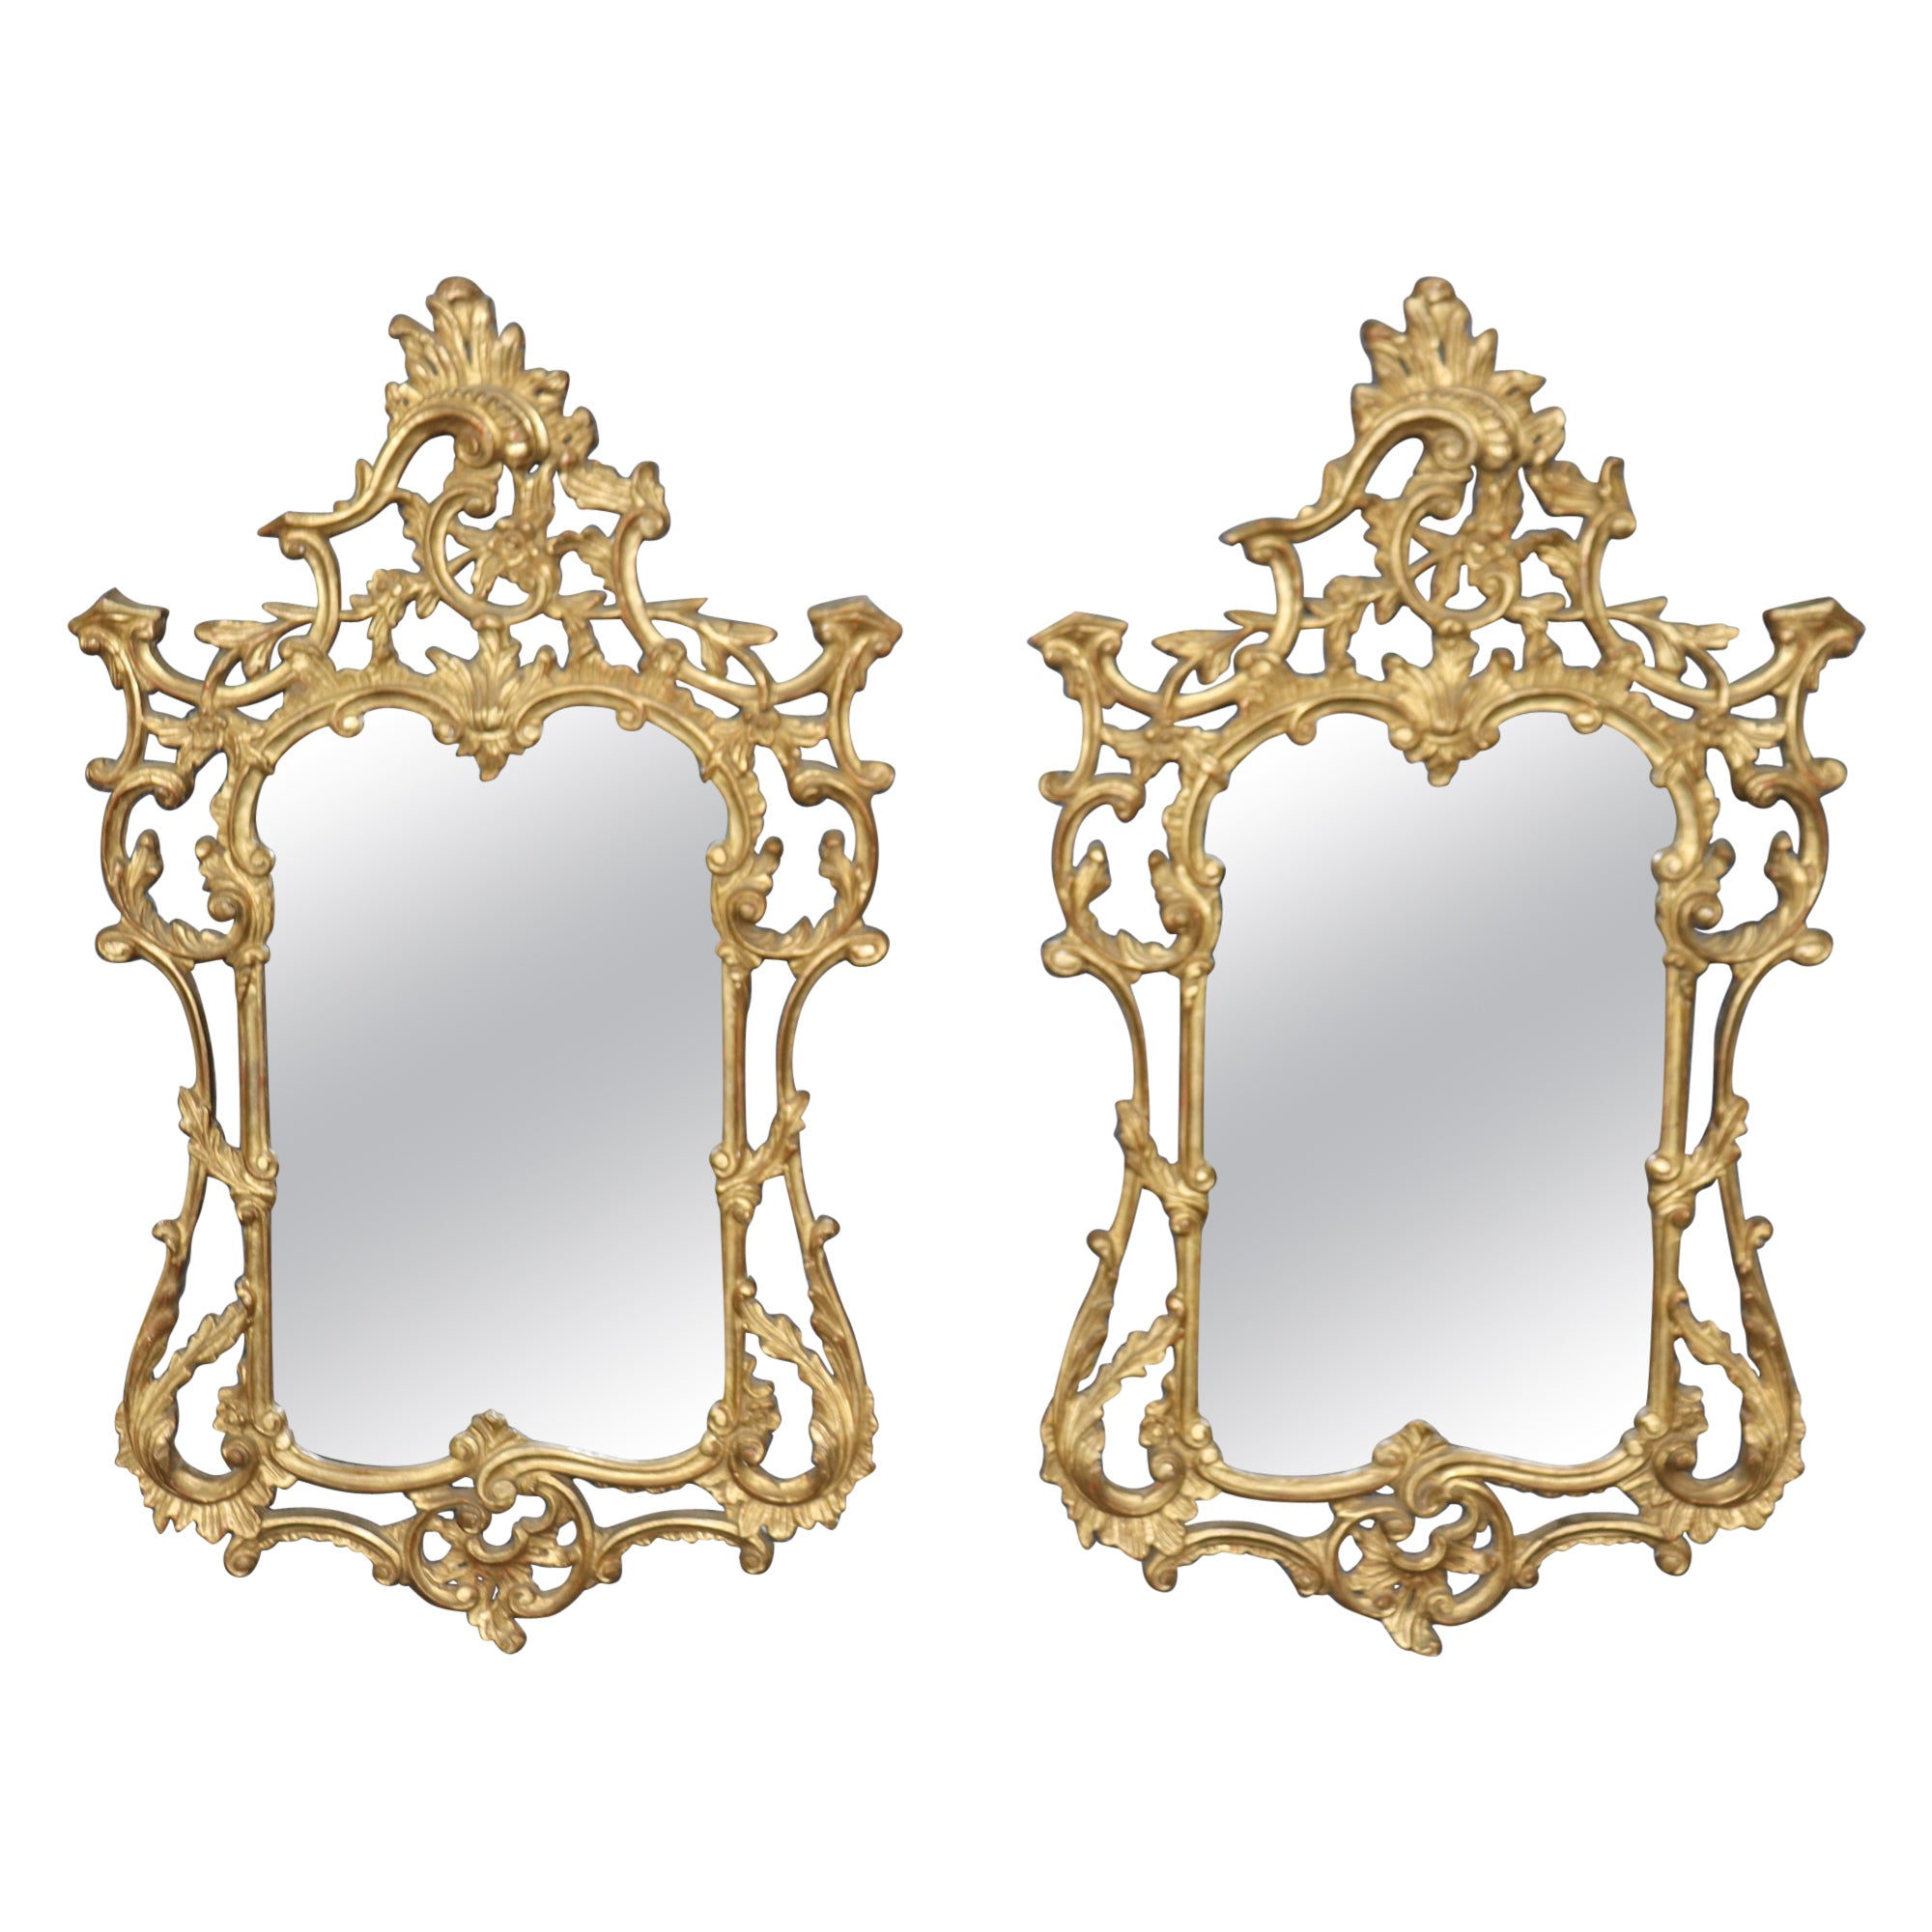 Pair of Magnificent Carved Italian Rococo Giltwood Louis XV Style Mirrors  For Sale